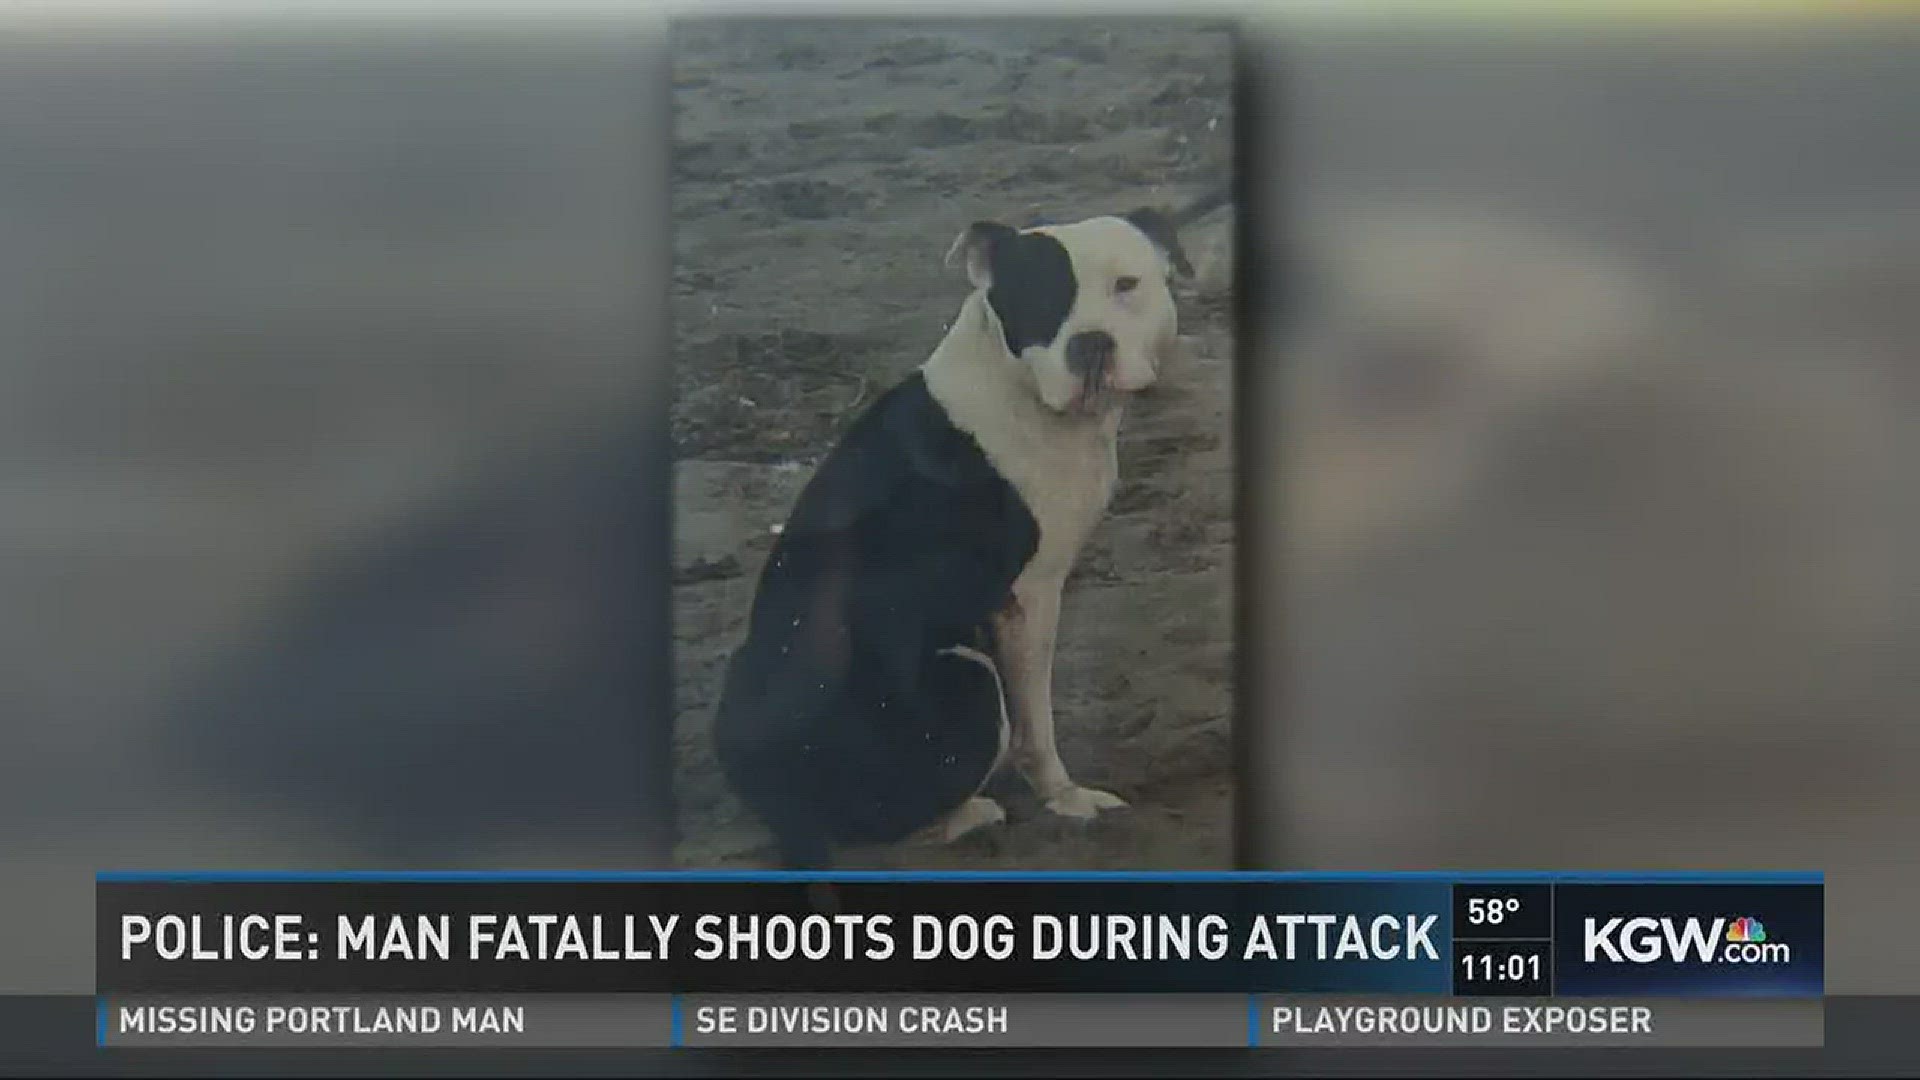 Police: Man fatally shoots dog during attack